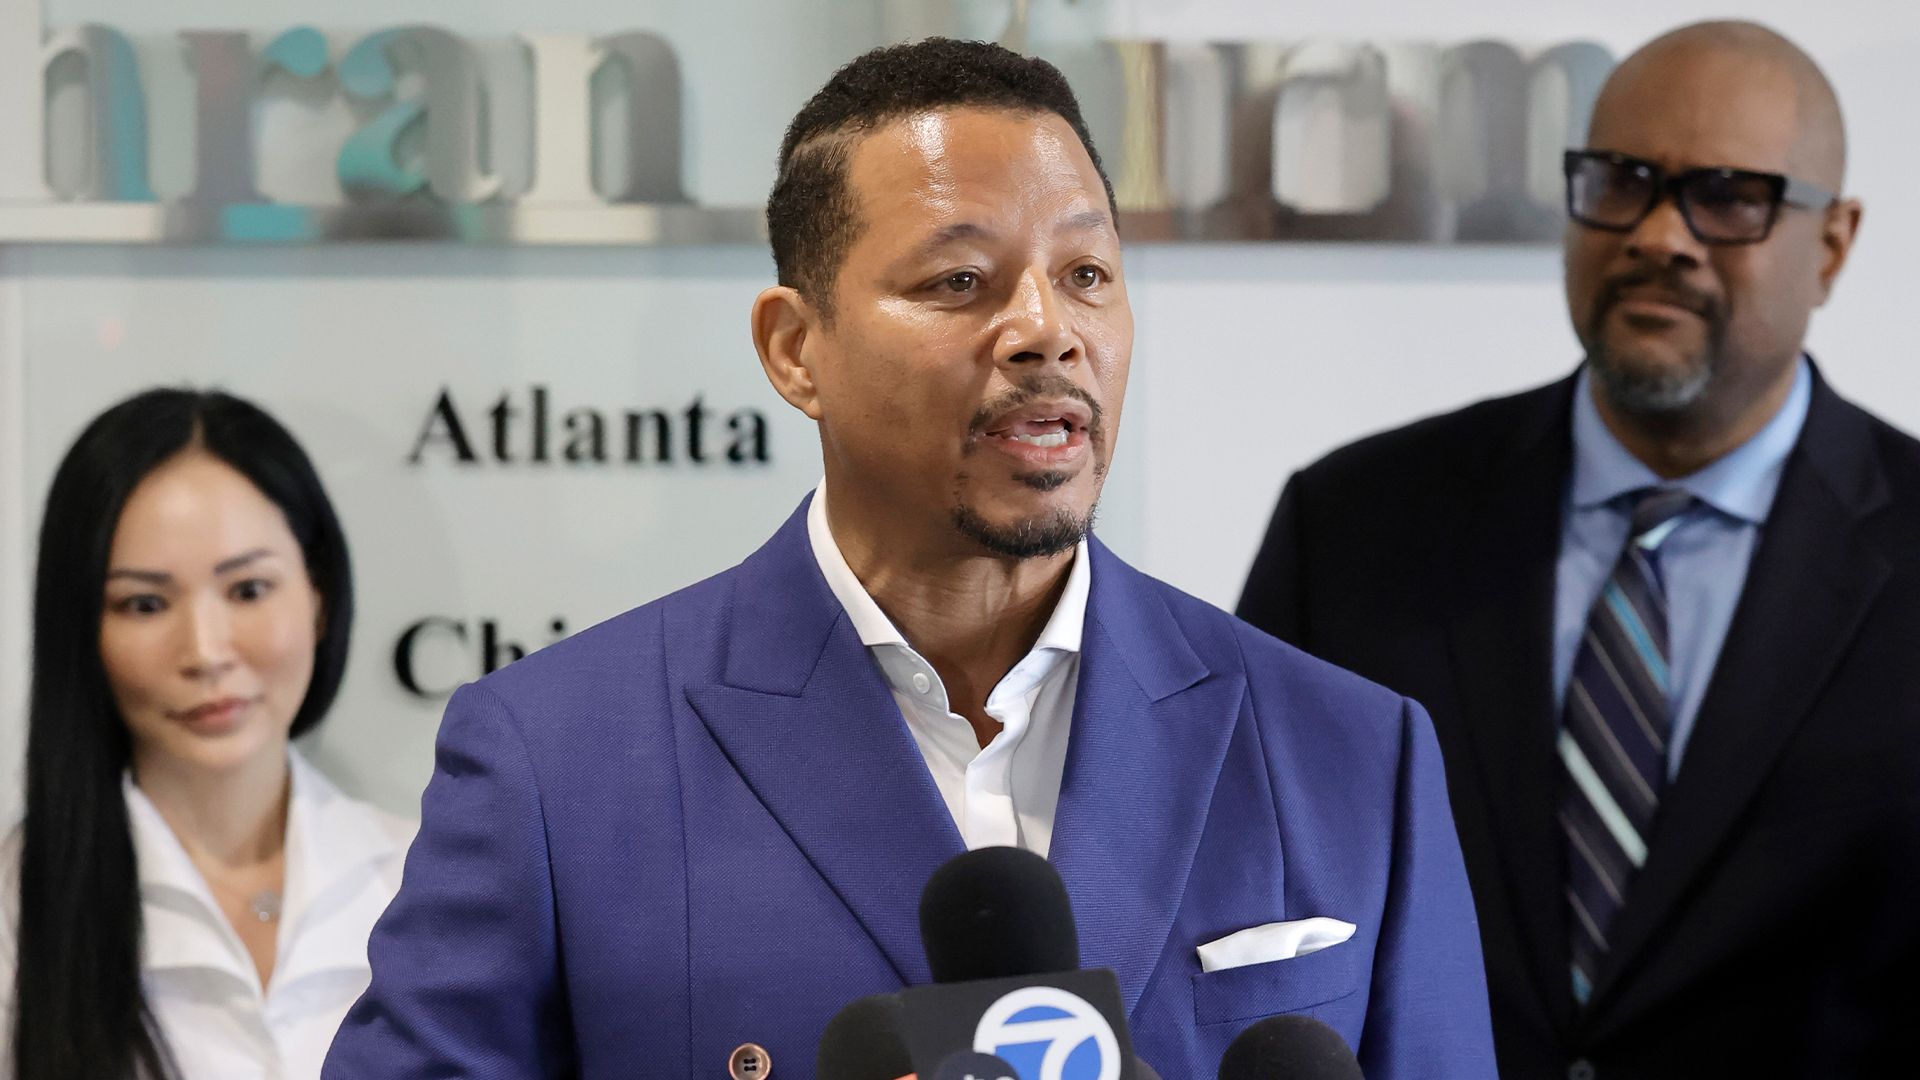 Terrence Howard Sues The Creative Artists Agency, Claims He Received 30% To 50% Less Than What He Should Have Per Episode Of ‘Empire’